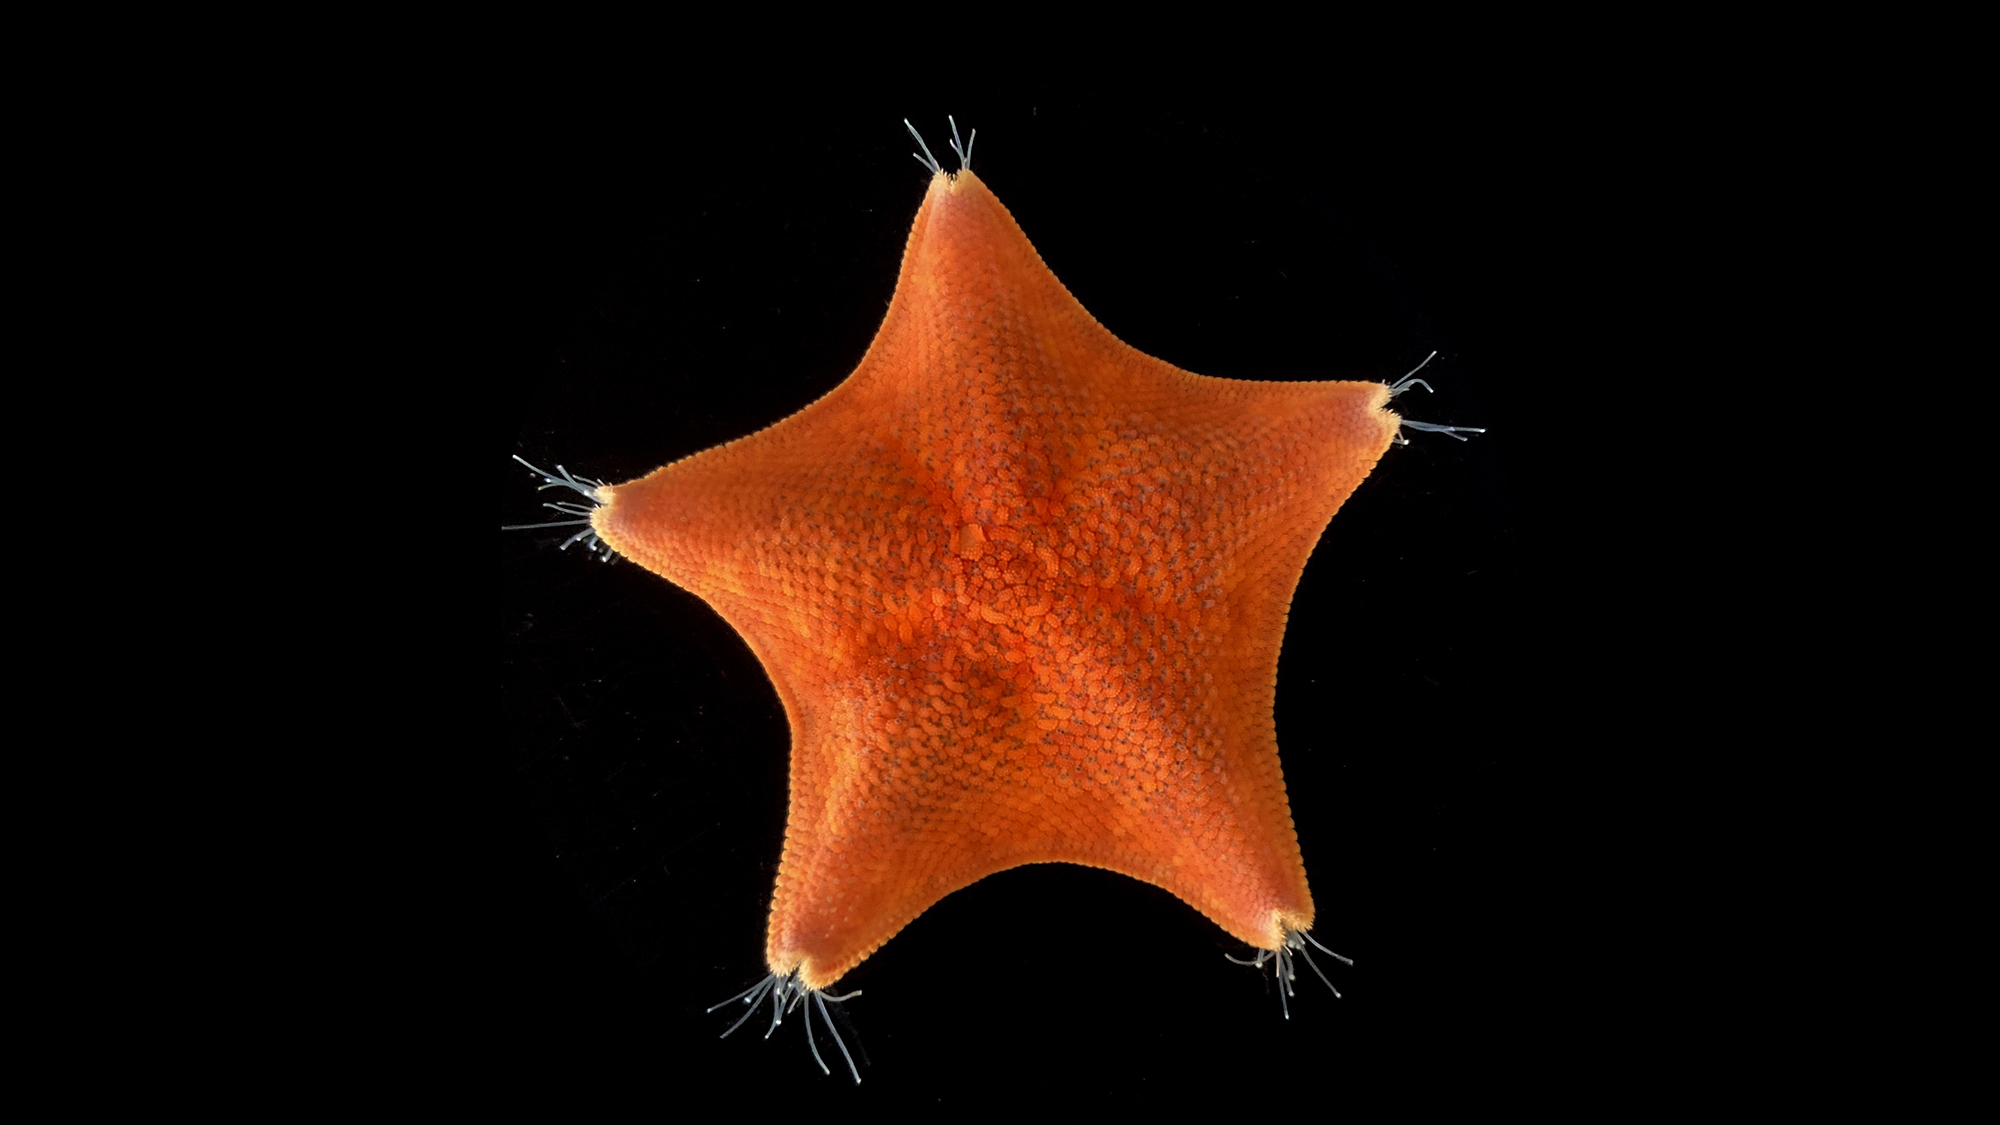 The sea star’s whole body is a head